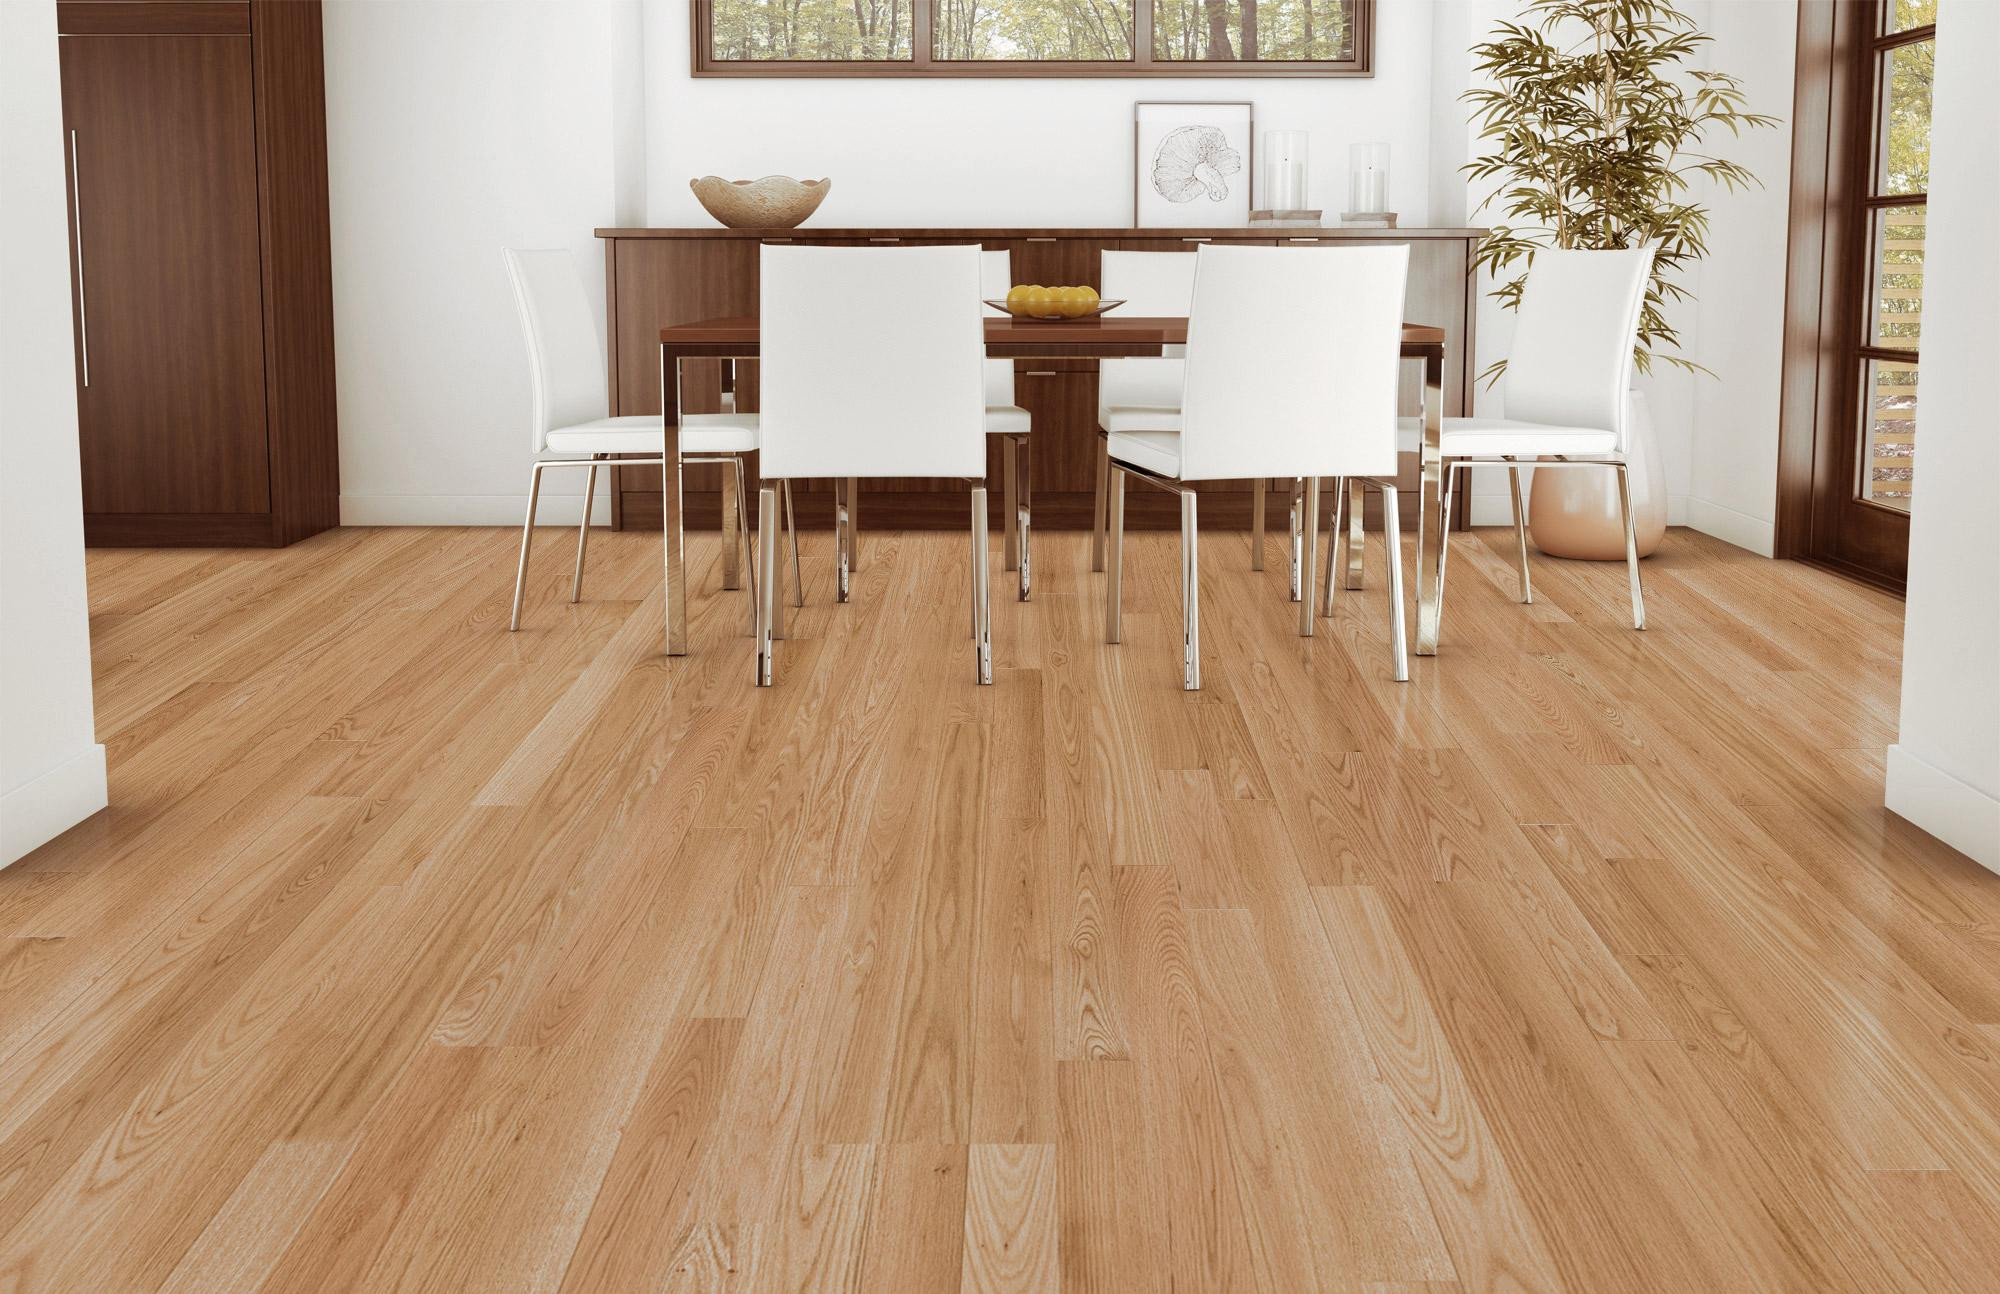 24 Famous Unfinished Red Oak Hardwood Flooring Prices 2024 free download unfinished red oak hardwood flooring prices of mullican ridgecrest red oak natural 1 2 thick 5 wide engineered throughout mullican ridgecrest red oak natural 1 2 thick 5 wide engineered hard